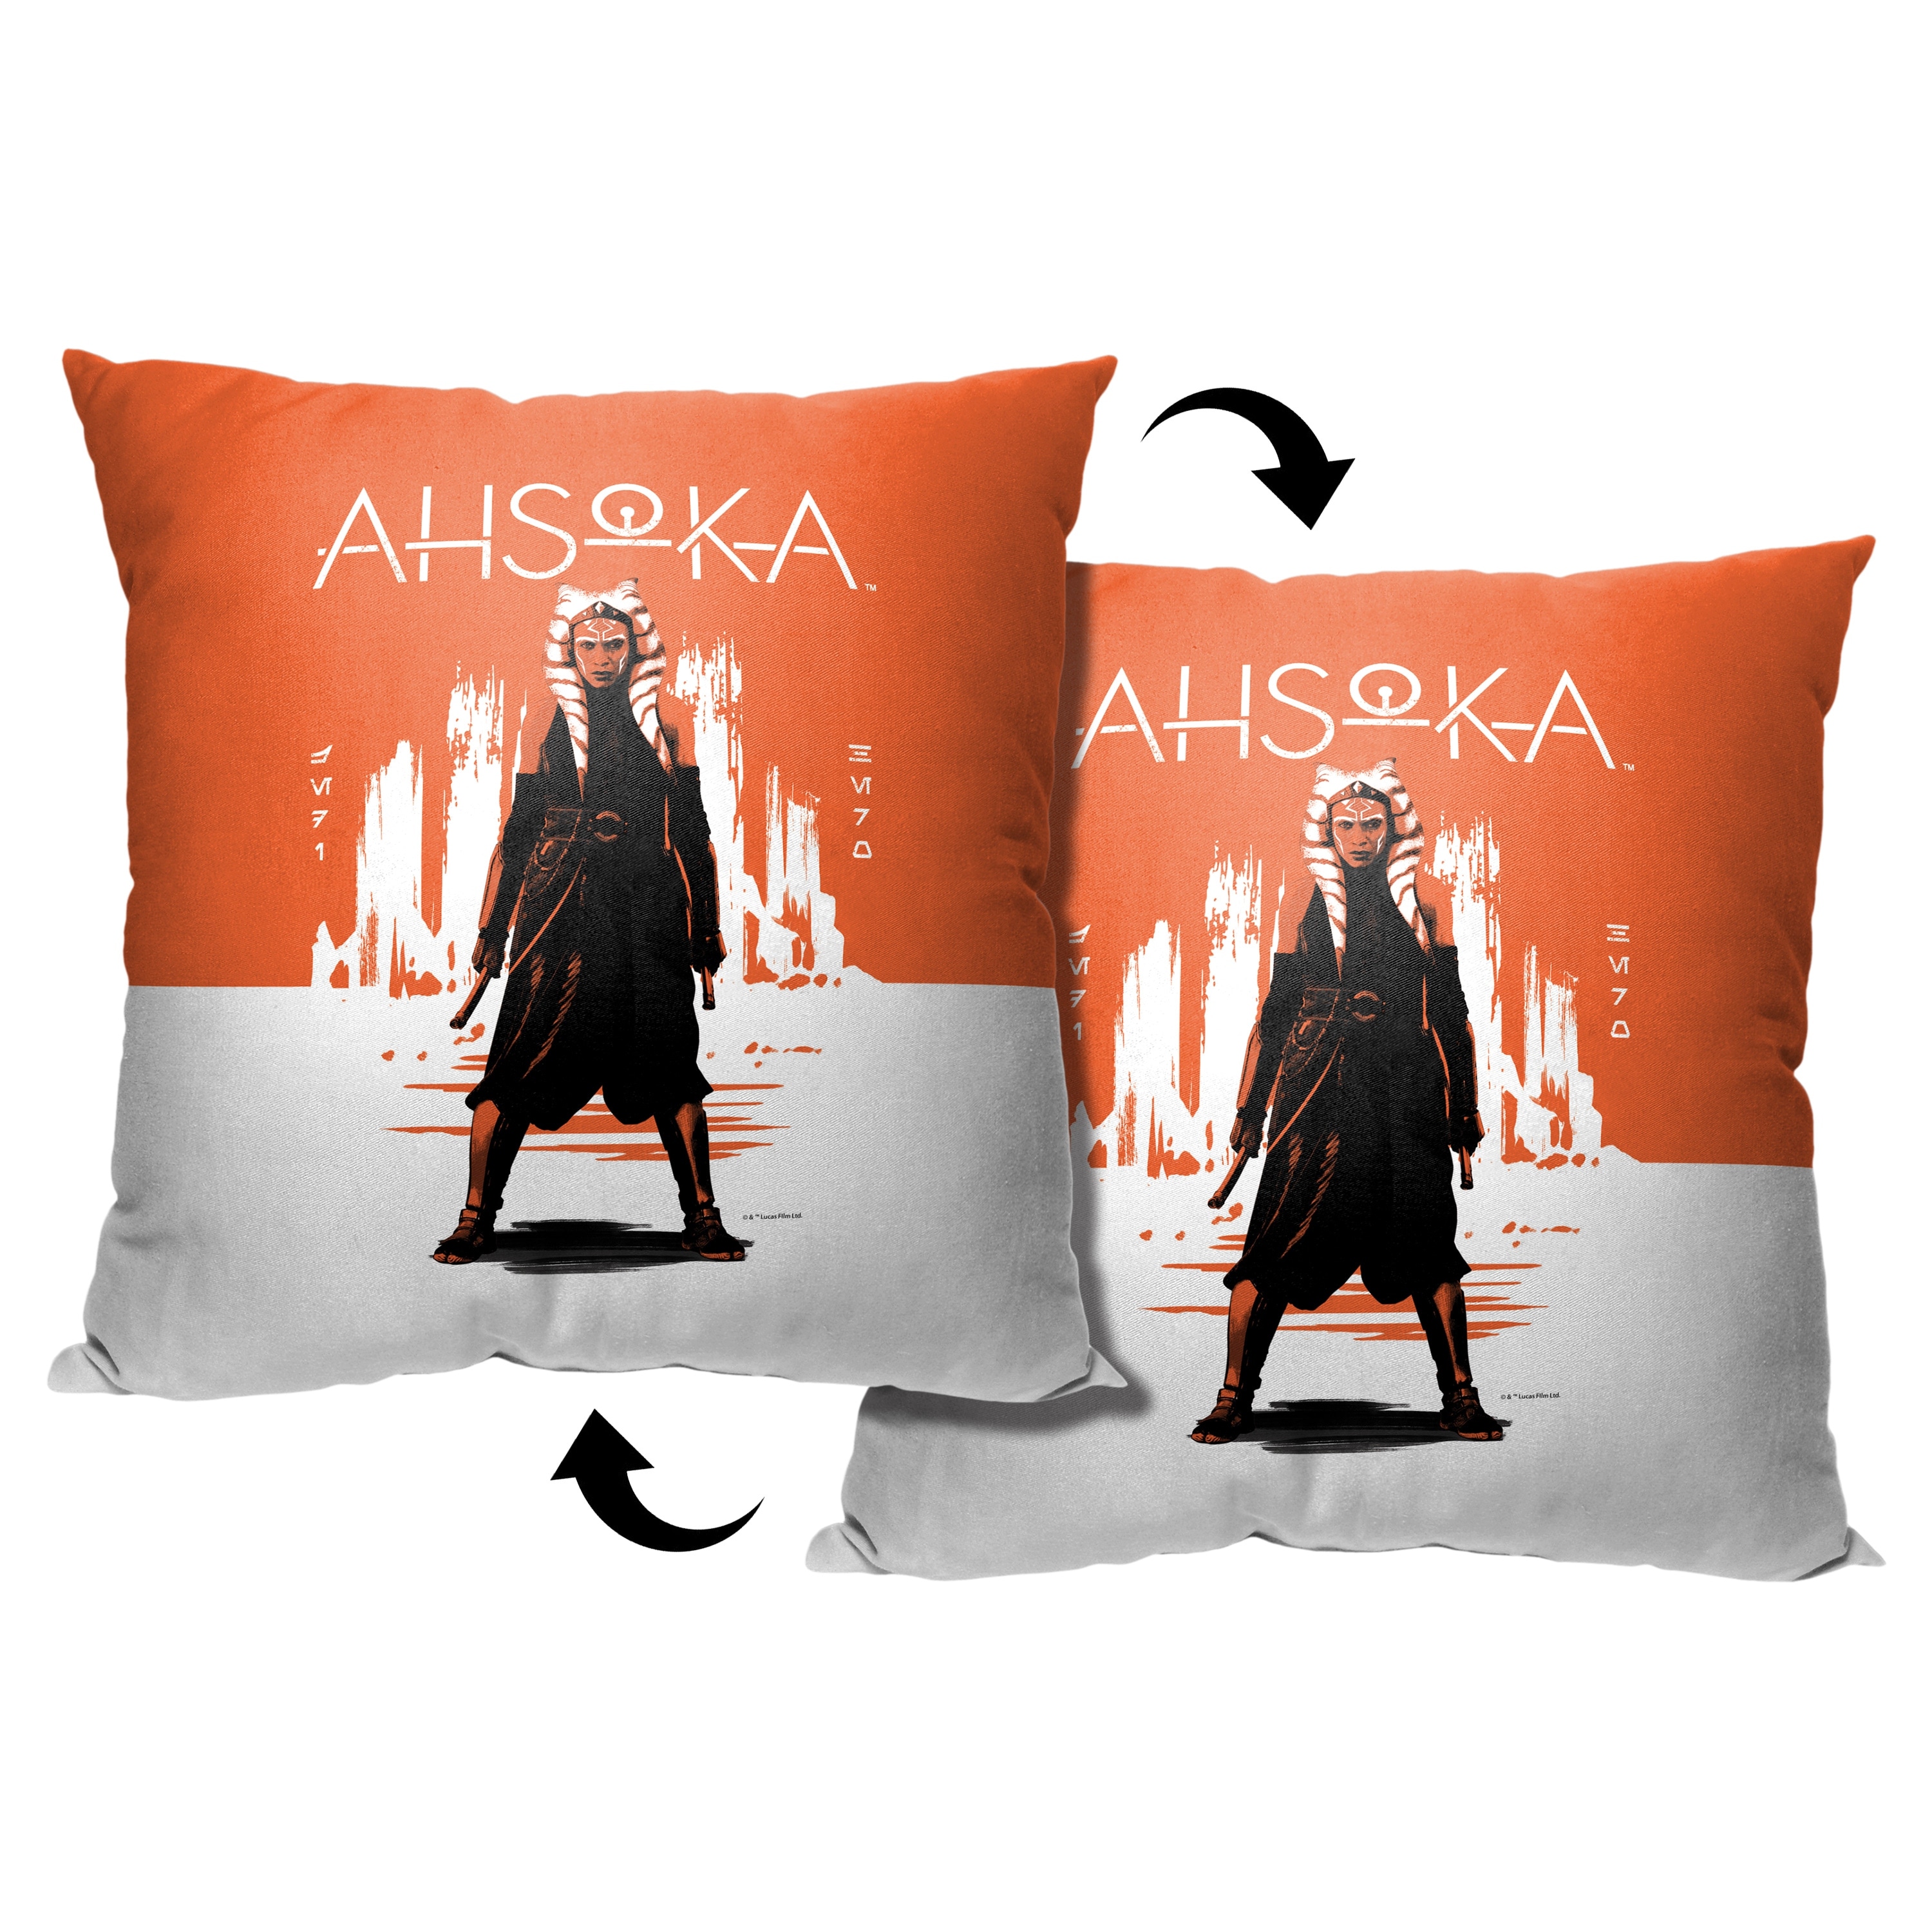 https://ak1.ostkcdn.com/images/products/is/images/direct/979b9b5cc2a36026ff15f1ae6f781bff10f022b7/Star-Wars-Ahsoka-Stoic-Printed-Throw-Pillow.jpg